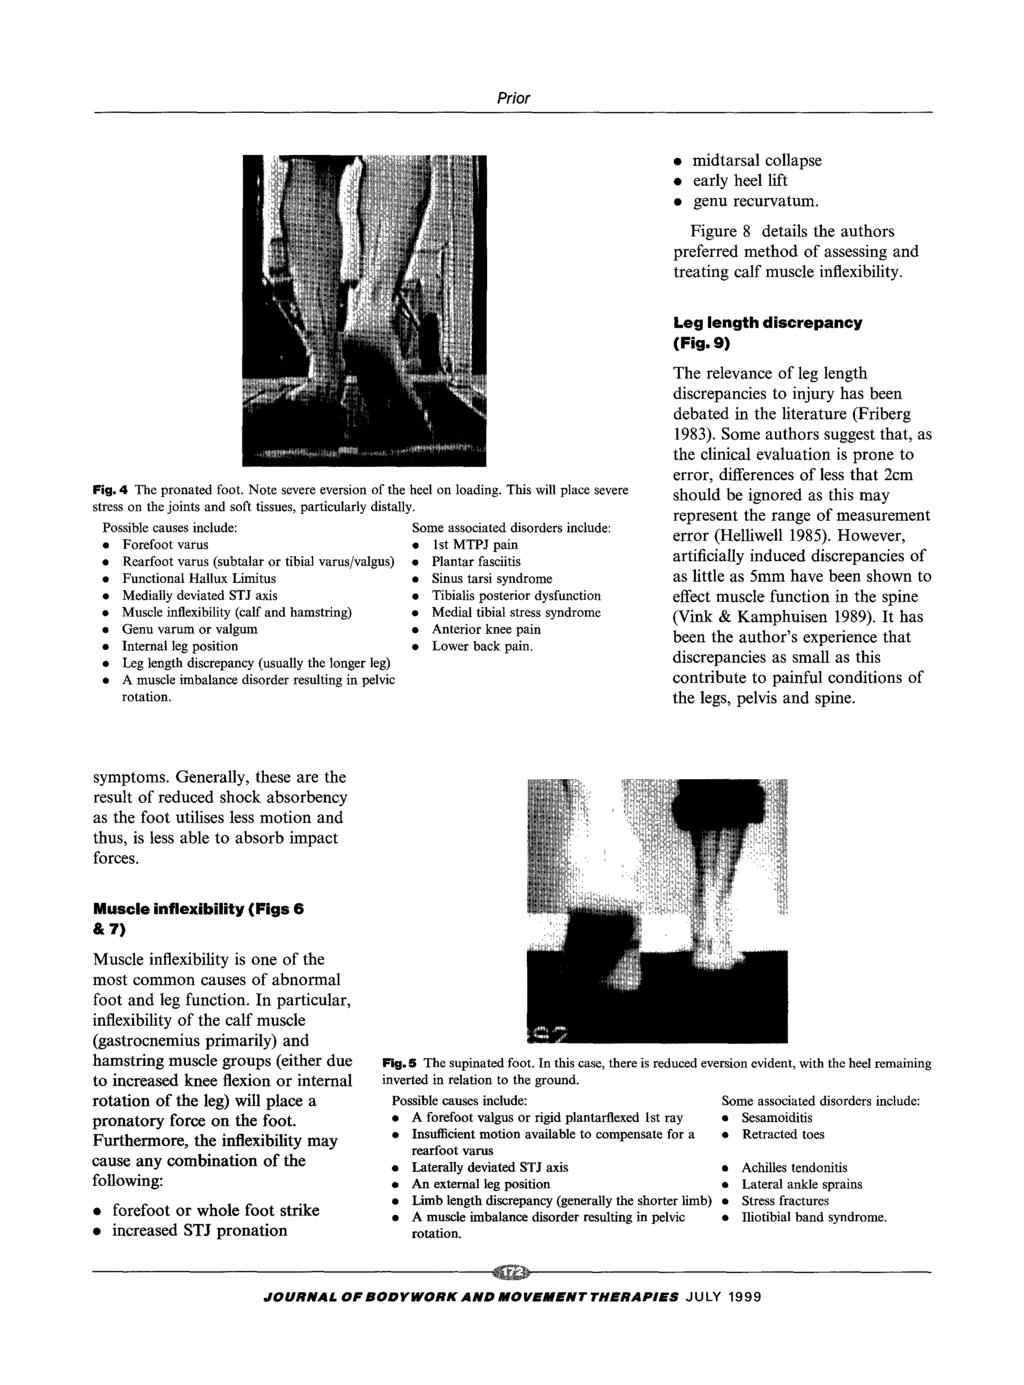 Prior midtarsal collapse early heel lift genu recurvatum. Figure 8 details the authors preferred method of assessing and treating calf muscle inflexibility. Leg length discrepancy (Fig.